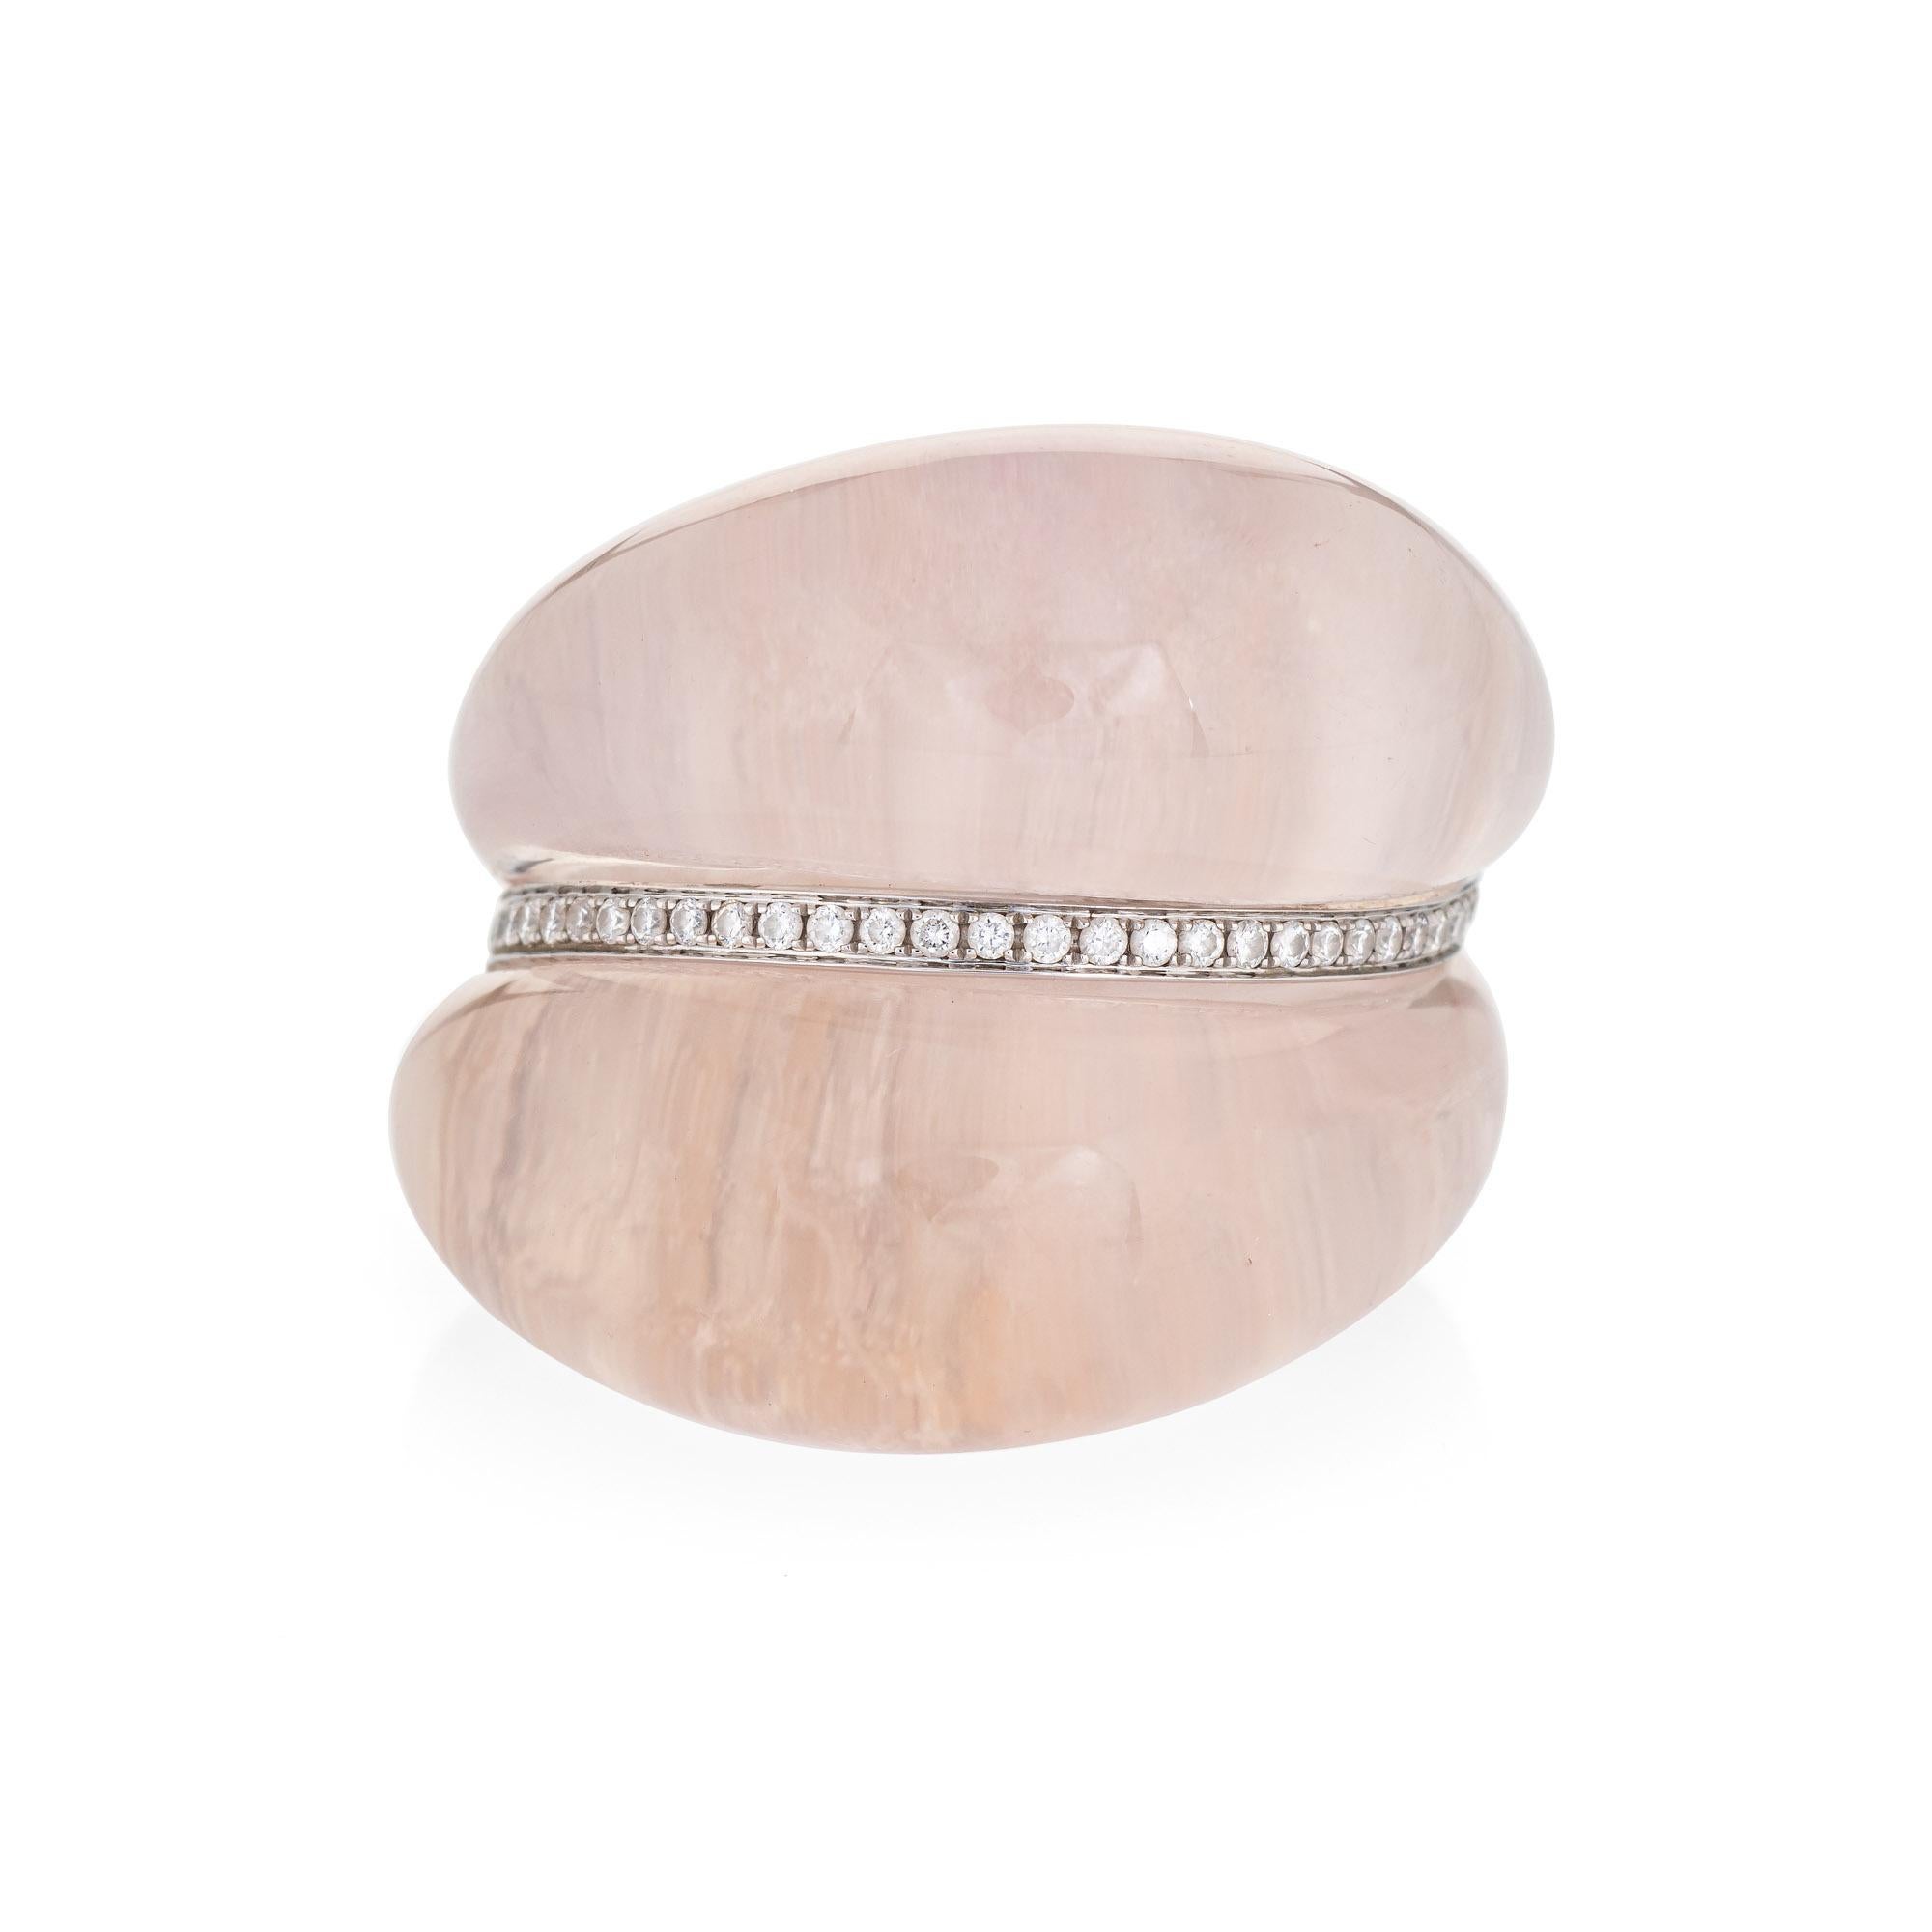 Stylish contemporary rose quartz & diamond ring crafted in 18 karat yellow gold. 

Cabochon cut rose quartz measures 30mm x 26mm. 37 diamonds total an estimated 0.118 carats (estimated at H-I color and VS2-SI1 clarity). The rose quartz is in very